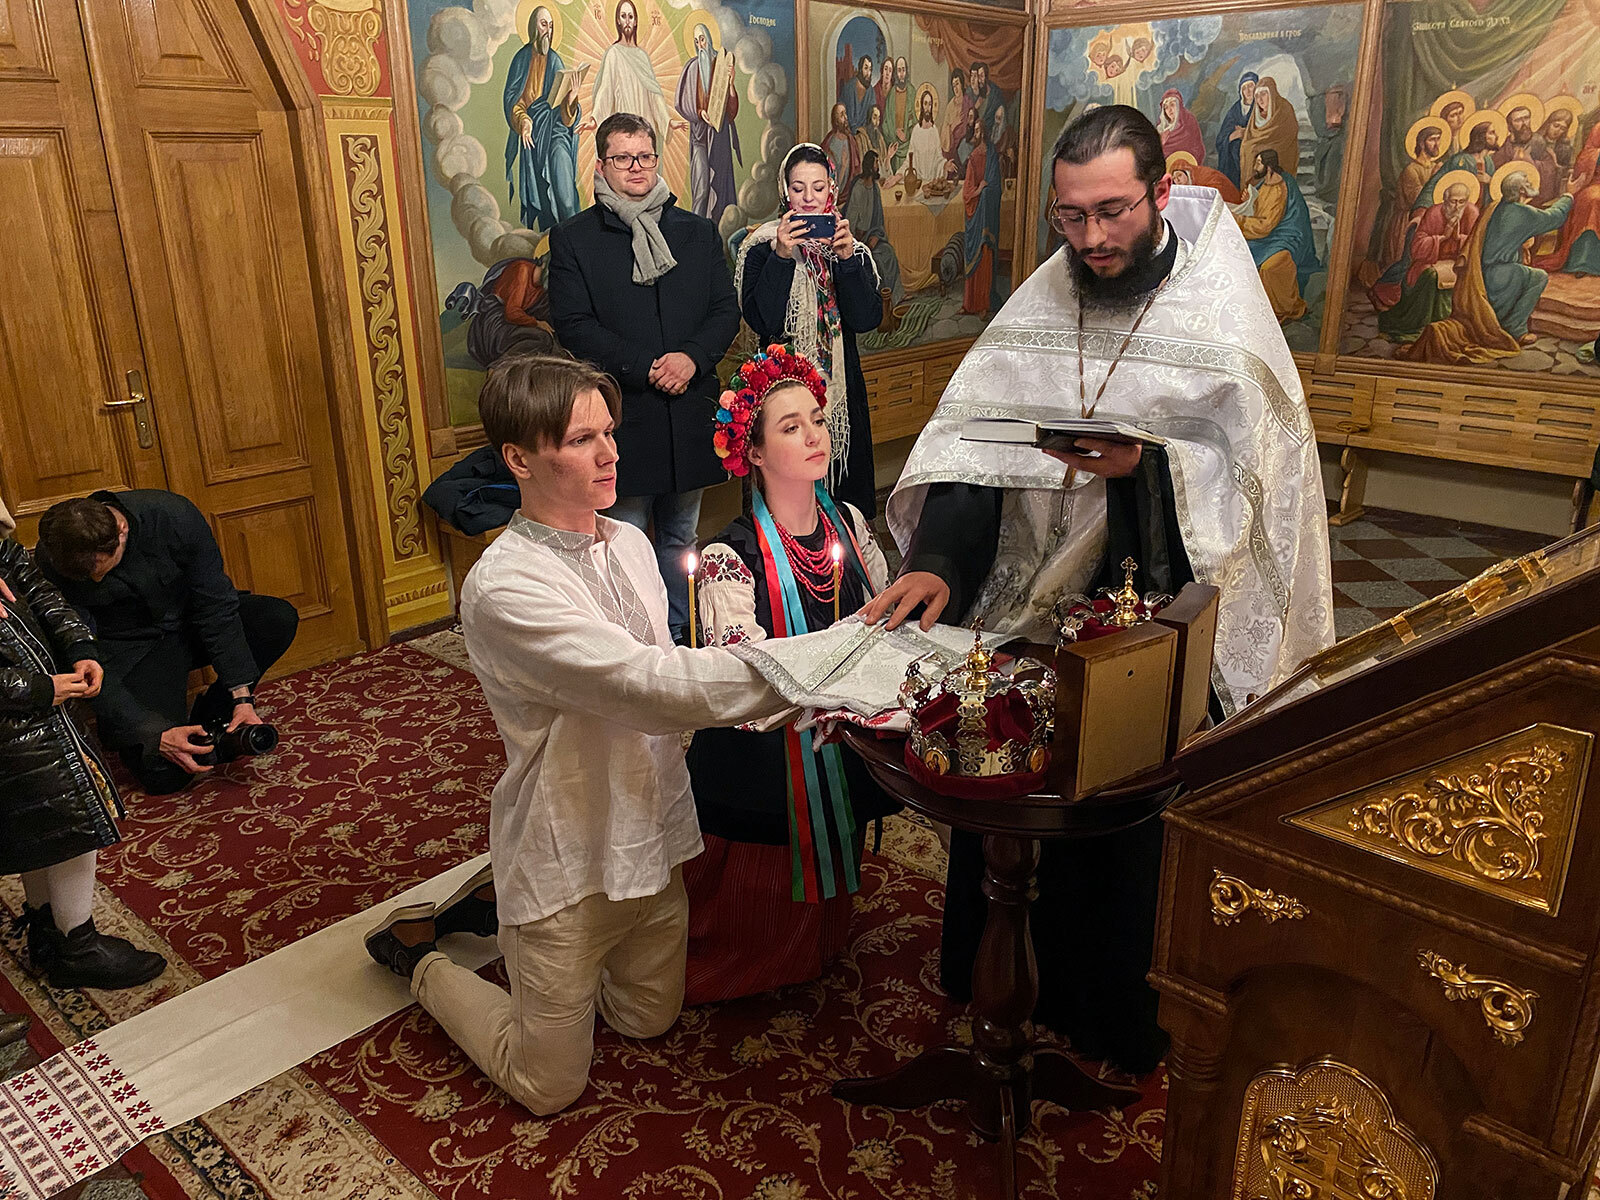 Sviatoslav Fursin, left, and Yarina Arieva, center, kneel during their wedding ceremony at St. Michael's cathedral in Kyiv on February 24. Arieva, a 21 year-old deputy on the Kyiv city council, and Fursin, a 24 year-old software engineer, had planned on getting married in May but moved it due to attacks by Russian forces on Thursday.